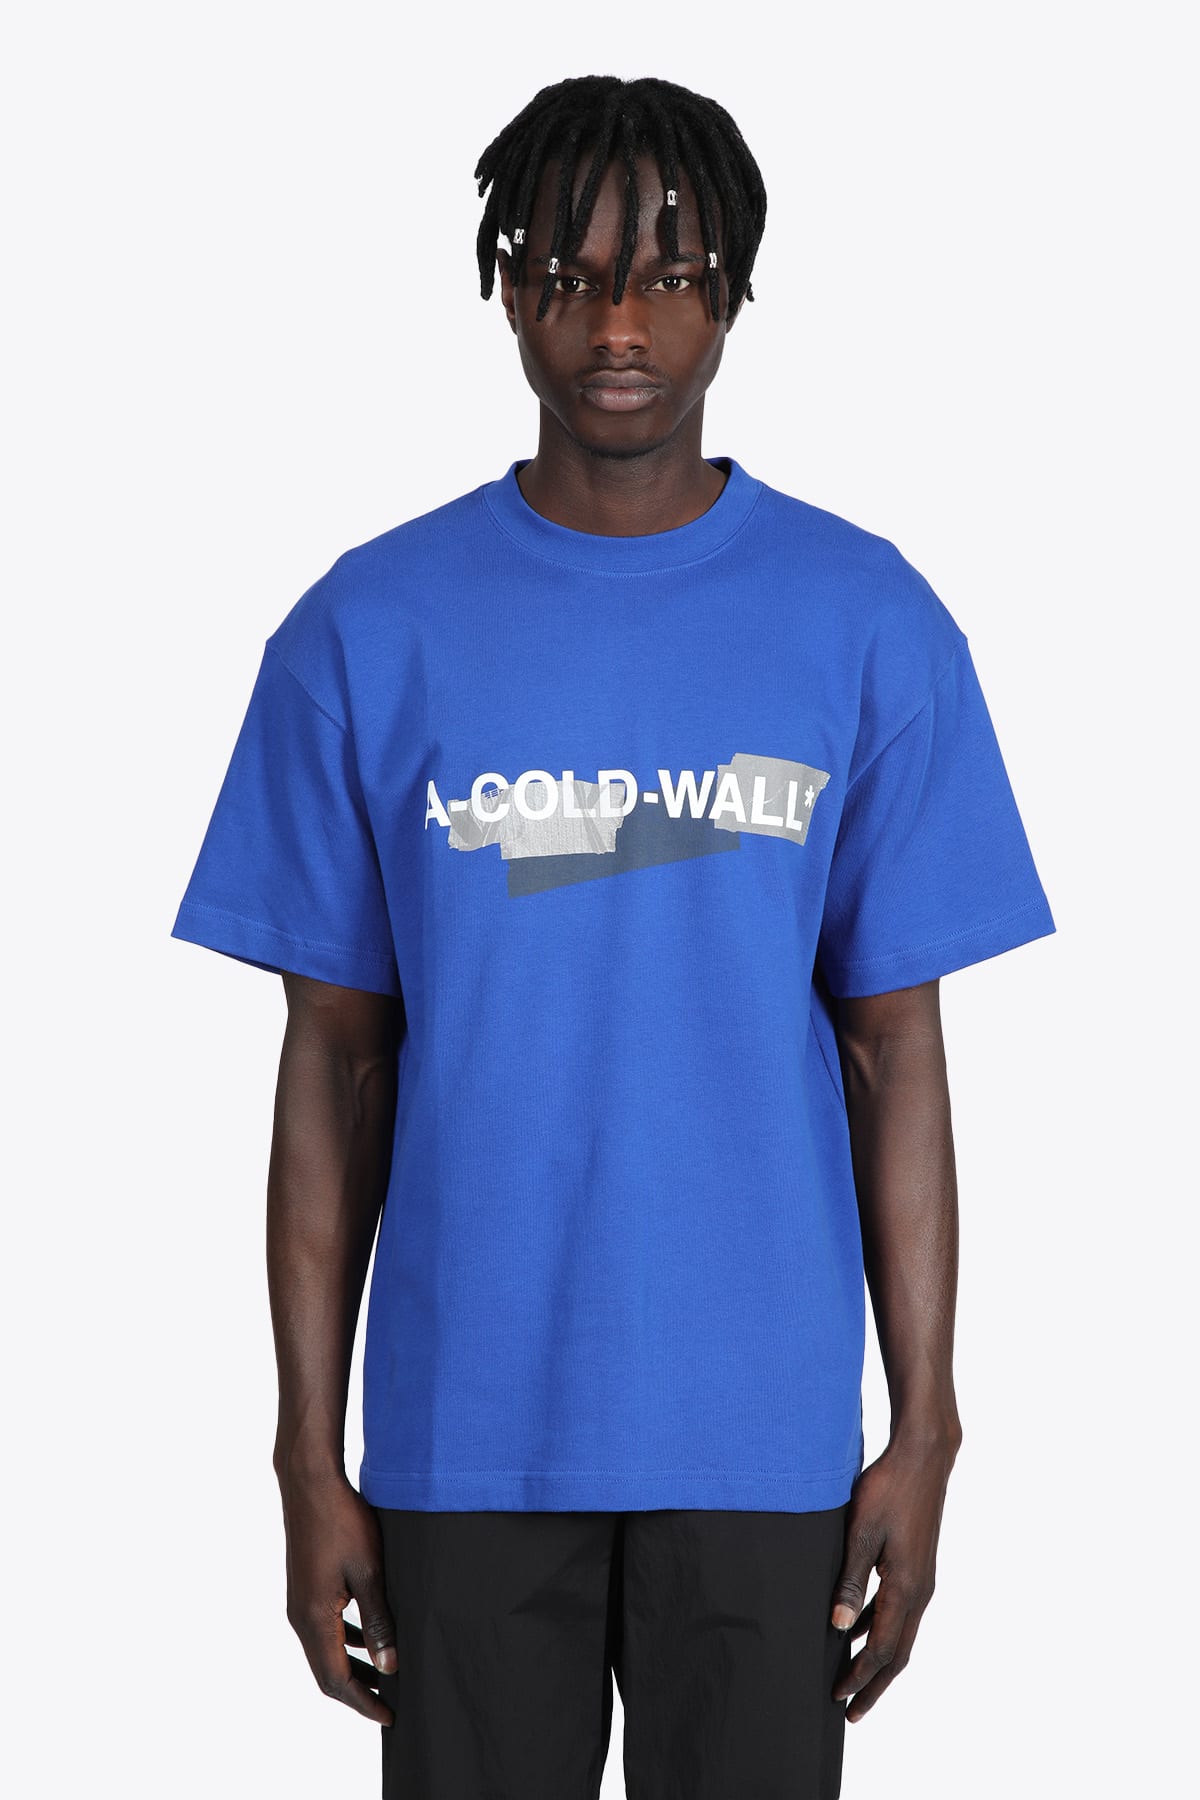 A-COLD-WALL Knitted Strata T-shirt Electric blue cotton t-shirt with frotn logo print